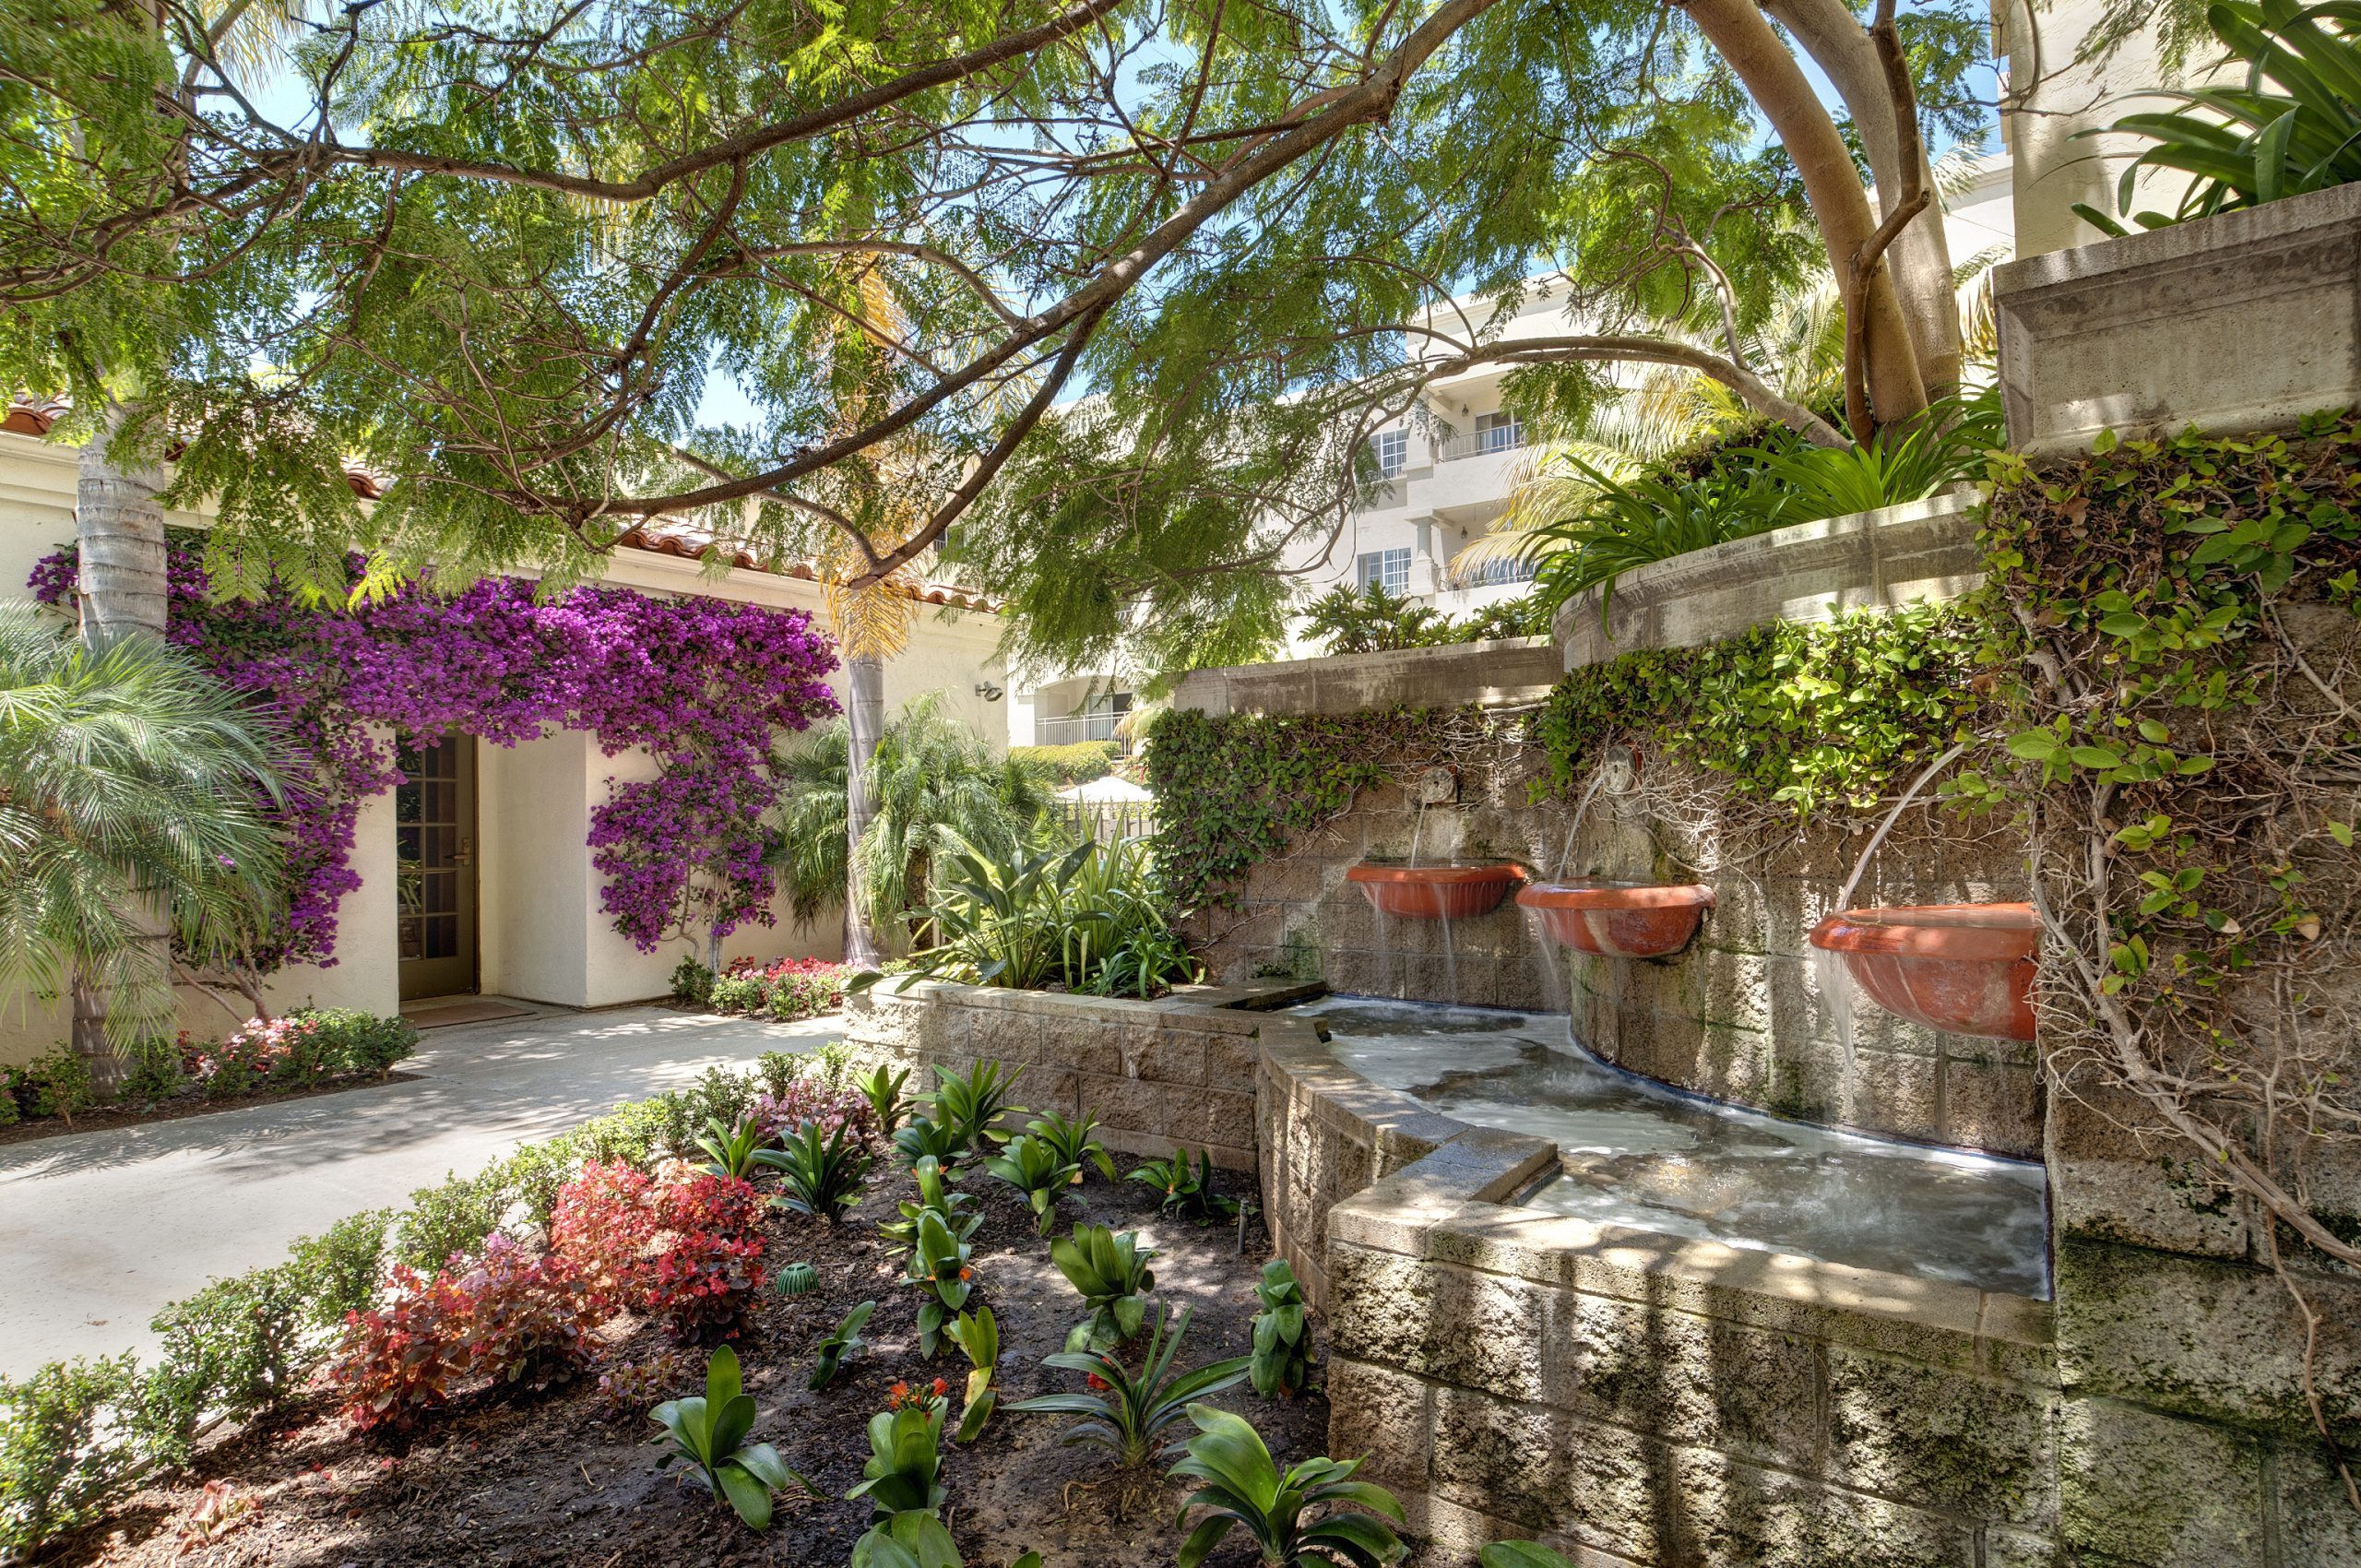 A serene courtyard adorned with a beautiful fountain and lush green plants, creating a tranquil atmosphere.